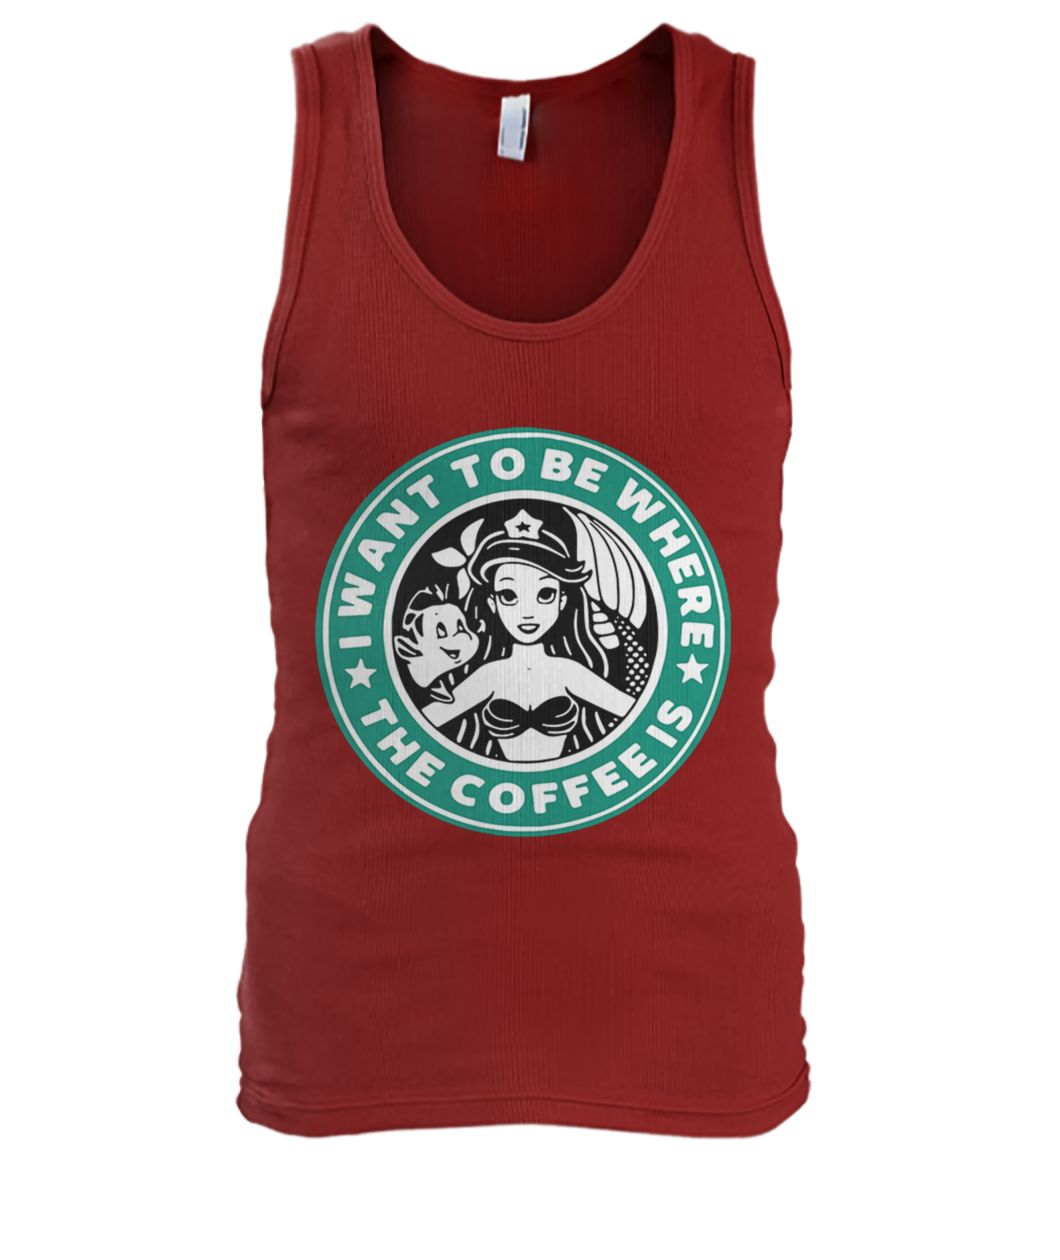 I want to be where the coffee is ariel little mermaid starbucks mashup men's tank top